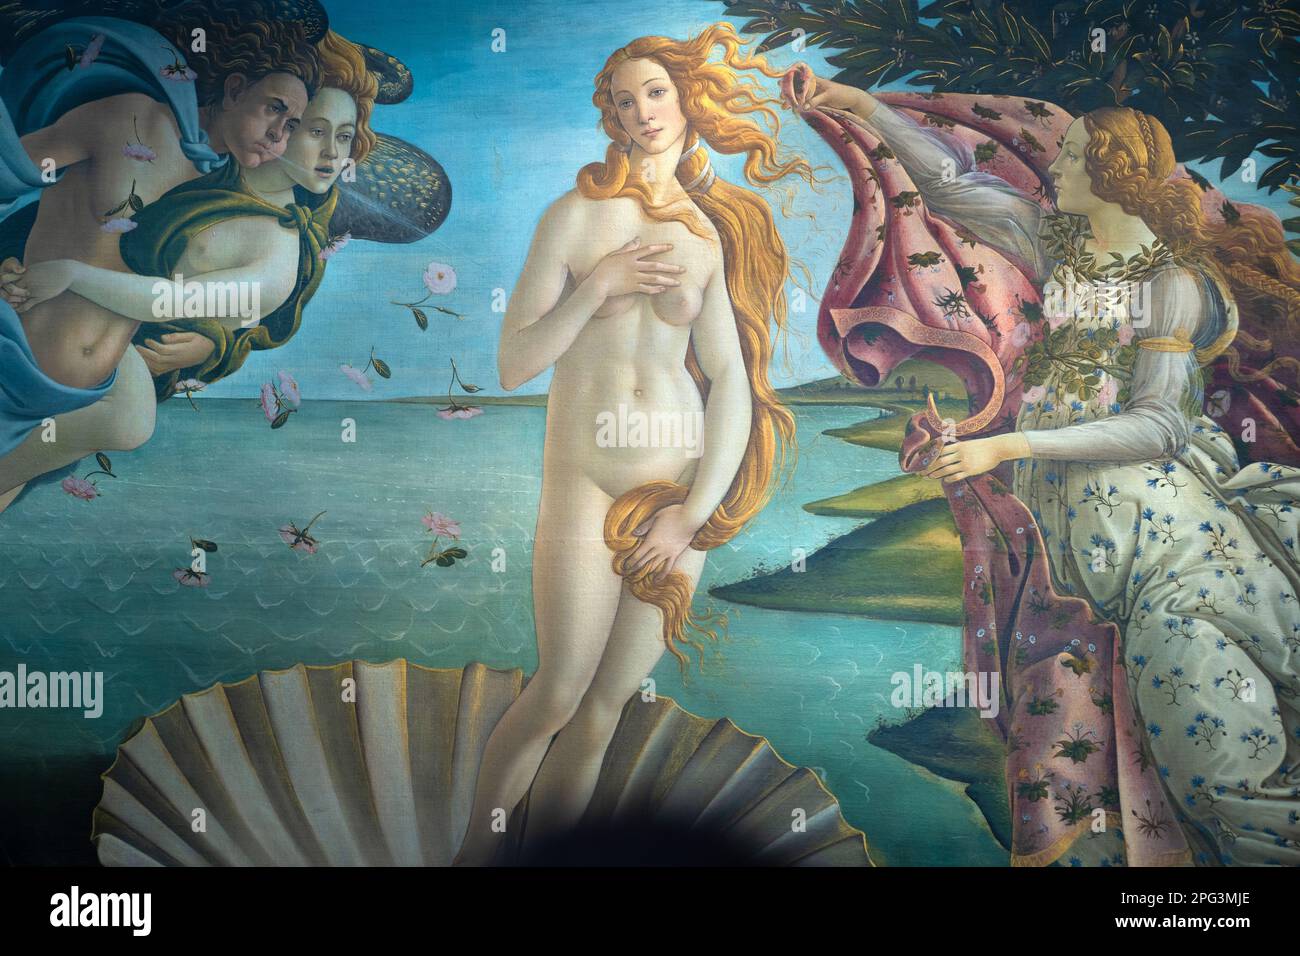 One of the most famous works of art in the world, The Birth of Venus by  Sandro Botticelli, on display at the Uffizi art gallery in Florence, Italy  Stock Photo - Alamy